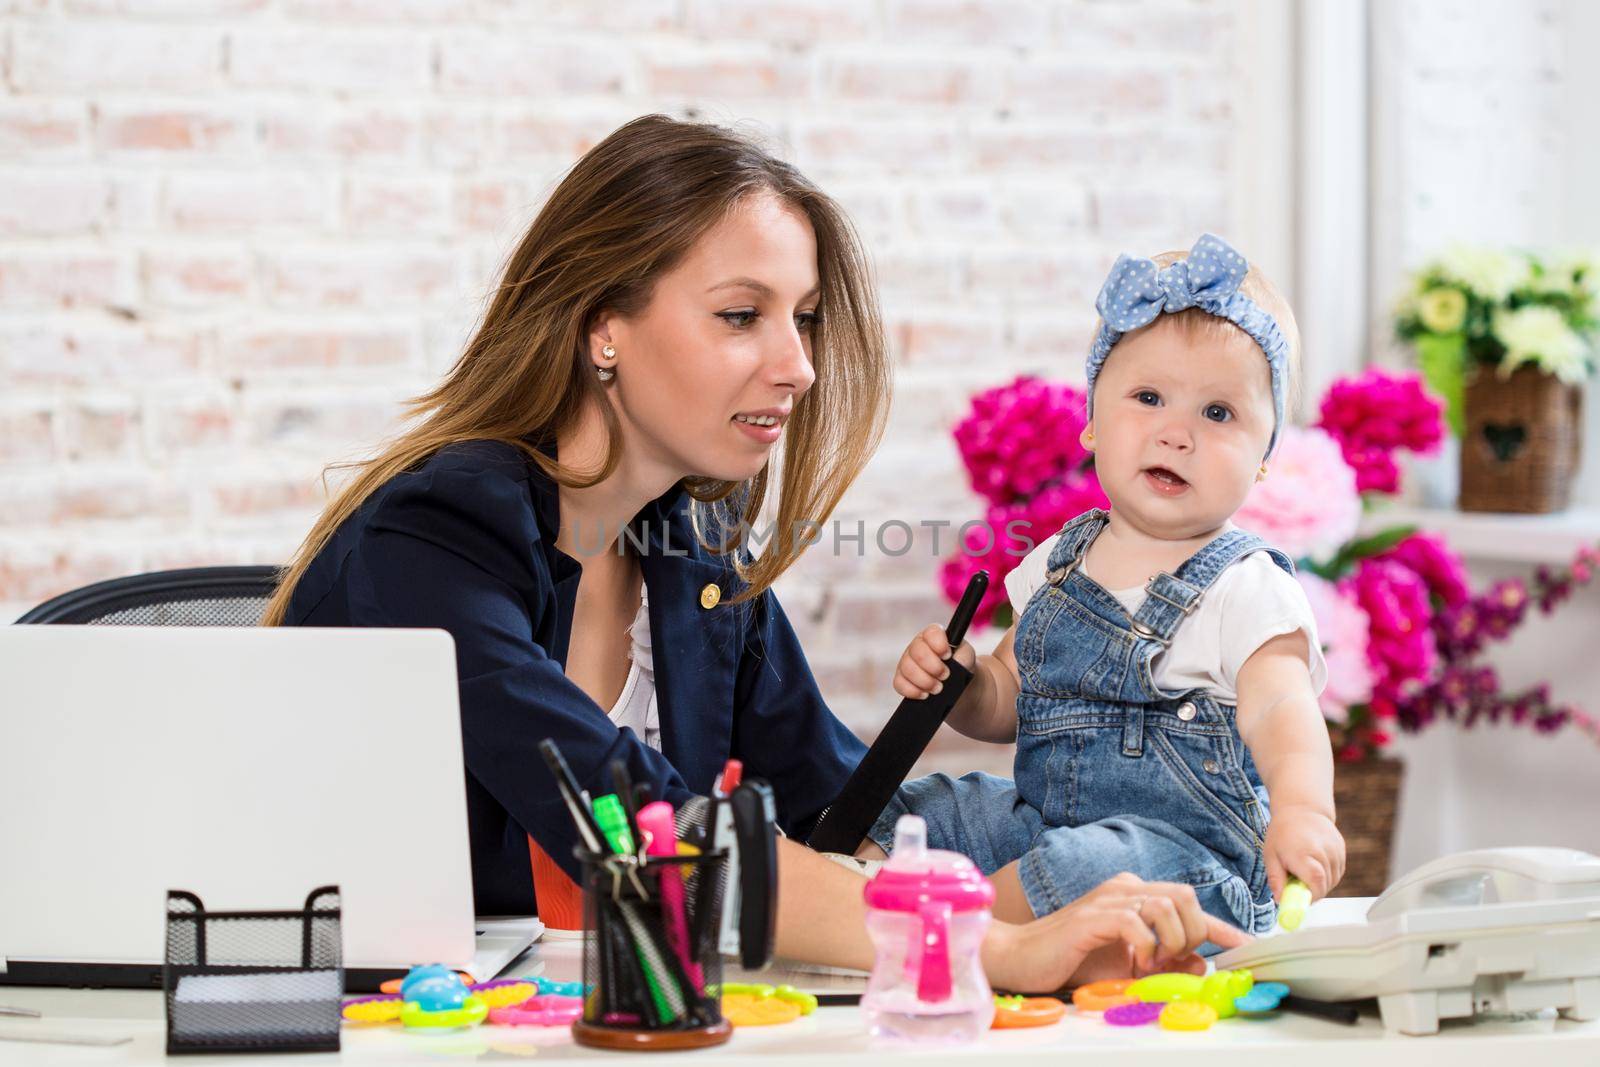 Working together is so fun Cheerful young beautiful businesswoman looking at telephone while sitting at her working place with her little daughter